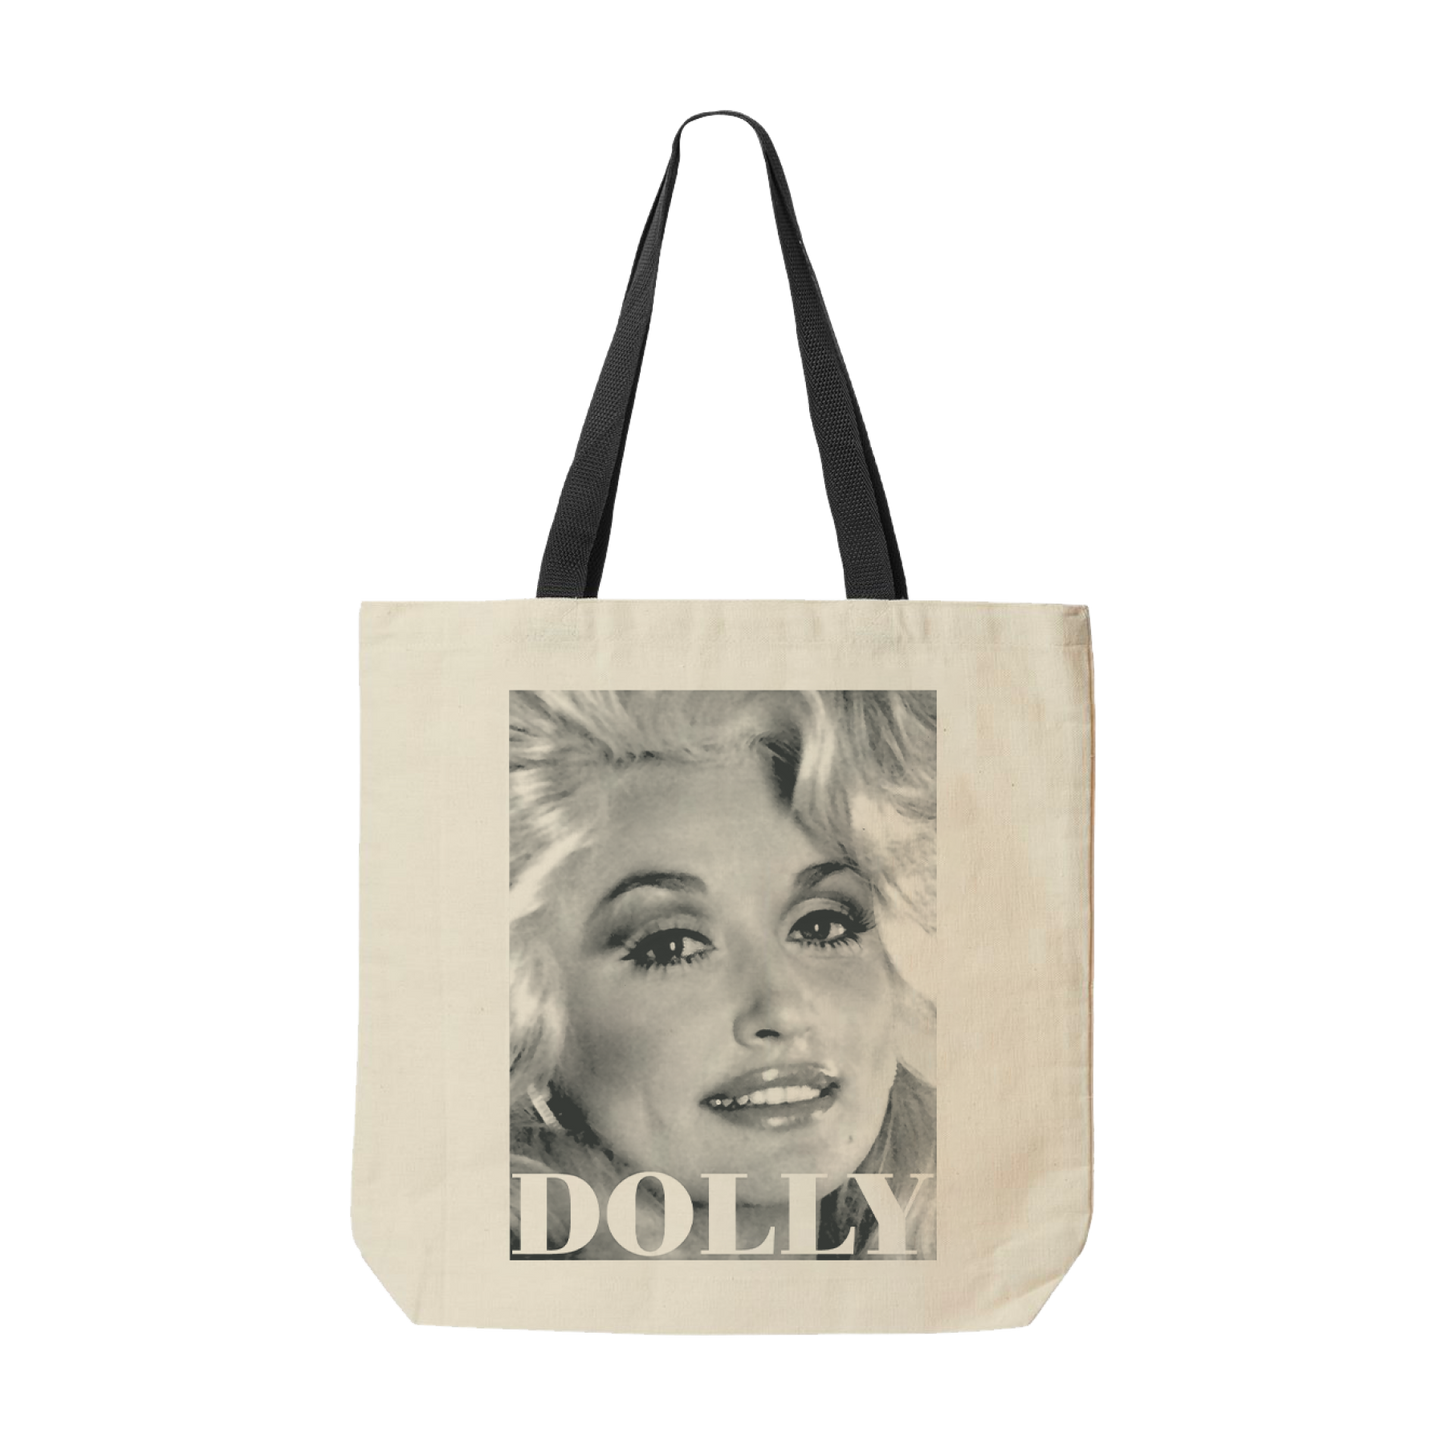 Official Dolly Parton Merchandise. Iconic black and while photo of a young Dolly Parton printed on a natural heavy weight canvas tote bag with black handles.